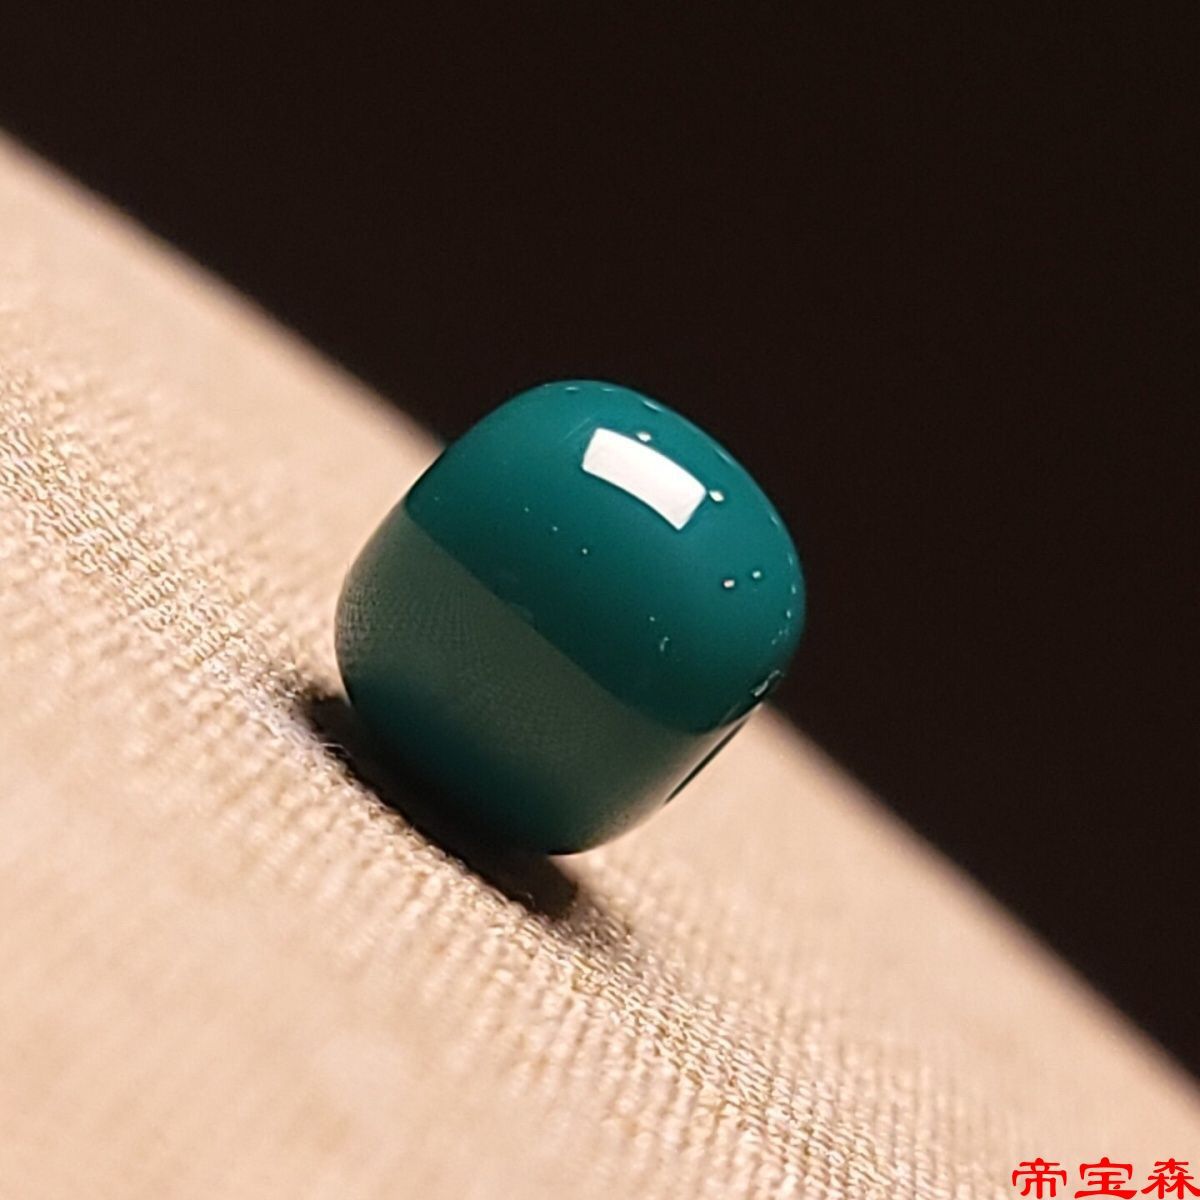 Xueba Glaze Kwan Color Series Old-Styled Bead Waist Bead Spacer Beads Jingang Xingyue Monkey Head Passion Fruit Diy Crafts Accessories